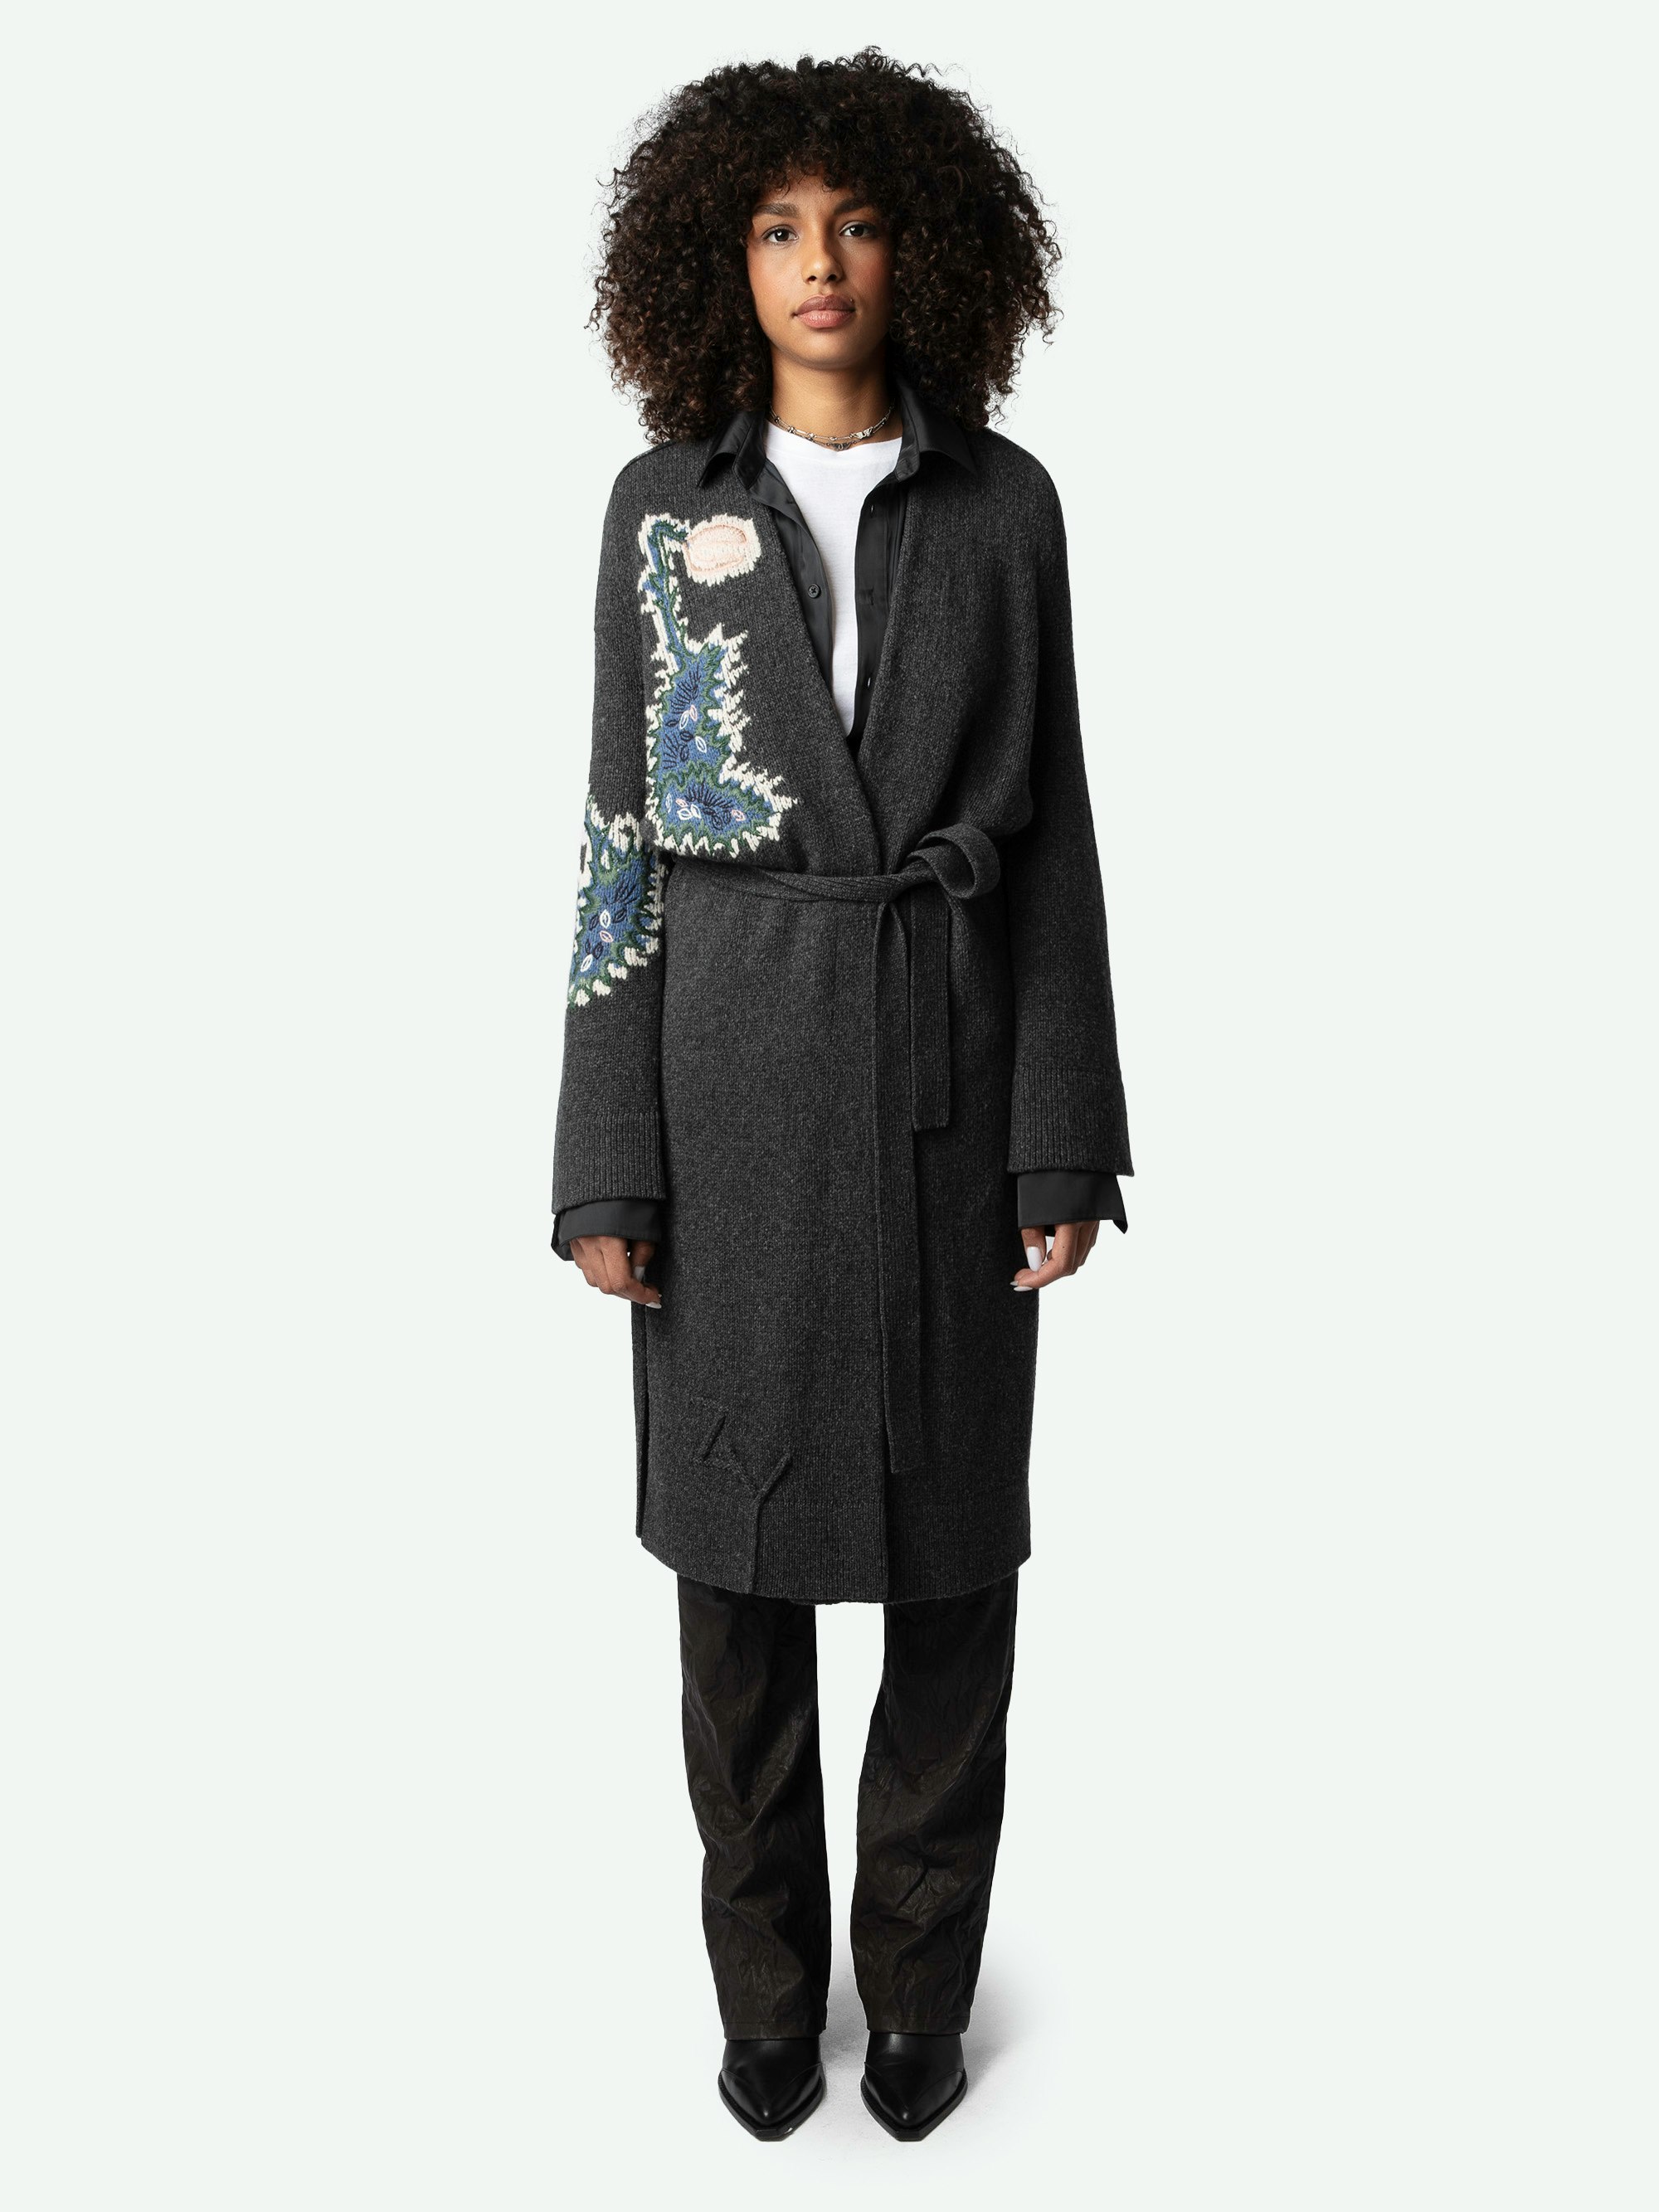 Salonny Coat - Long dark grey merino wool coat with removable belt and floral embroidered jacquard intarsia.